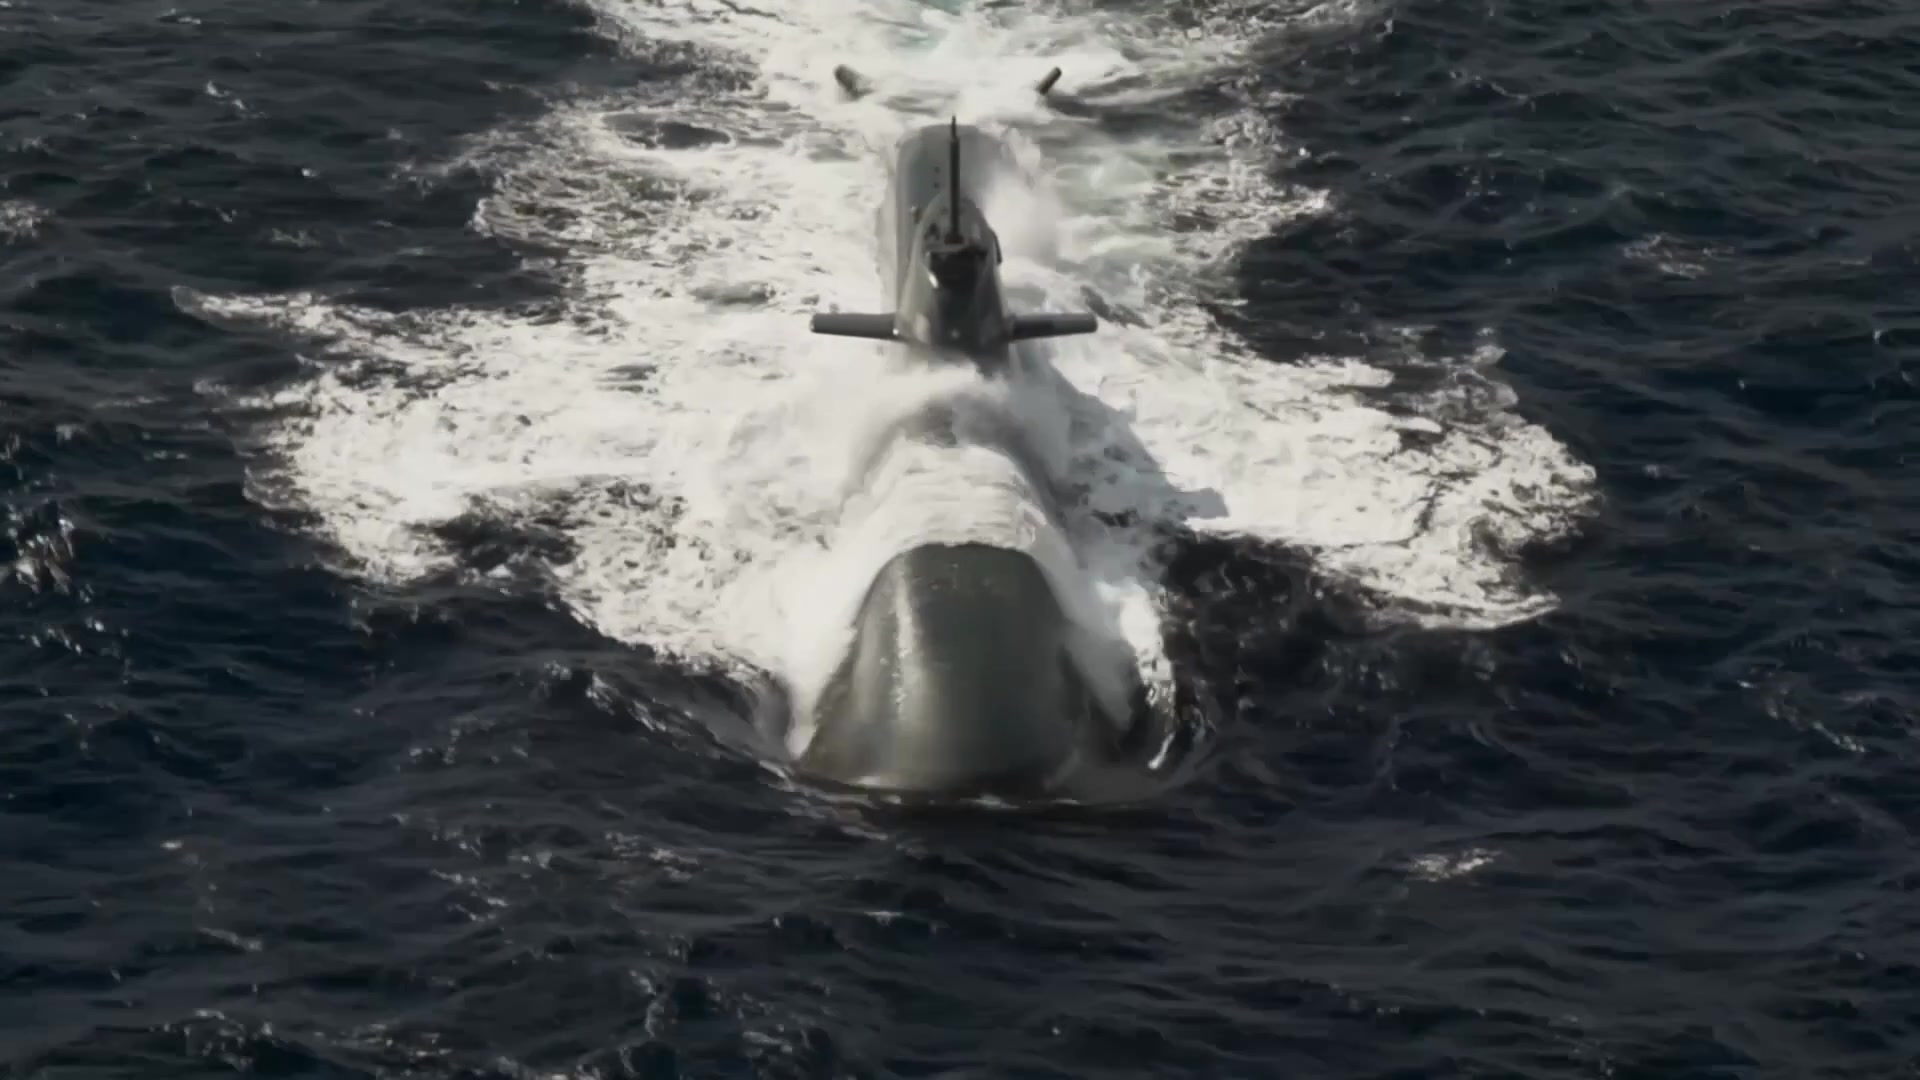 NATO ships participate in exercise Dynamic Manta 2019. The annual Allied Maritime Command exercise is meant to develop proficiency between NATO nations in anti-submarine and anti-surface warfare. Courtesy video by NATO TV